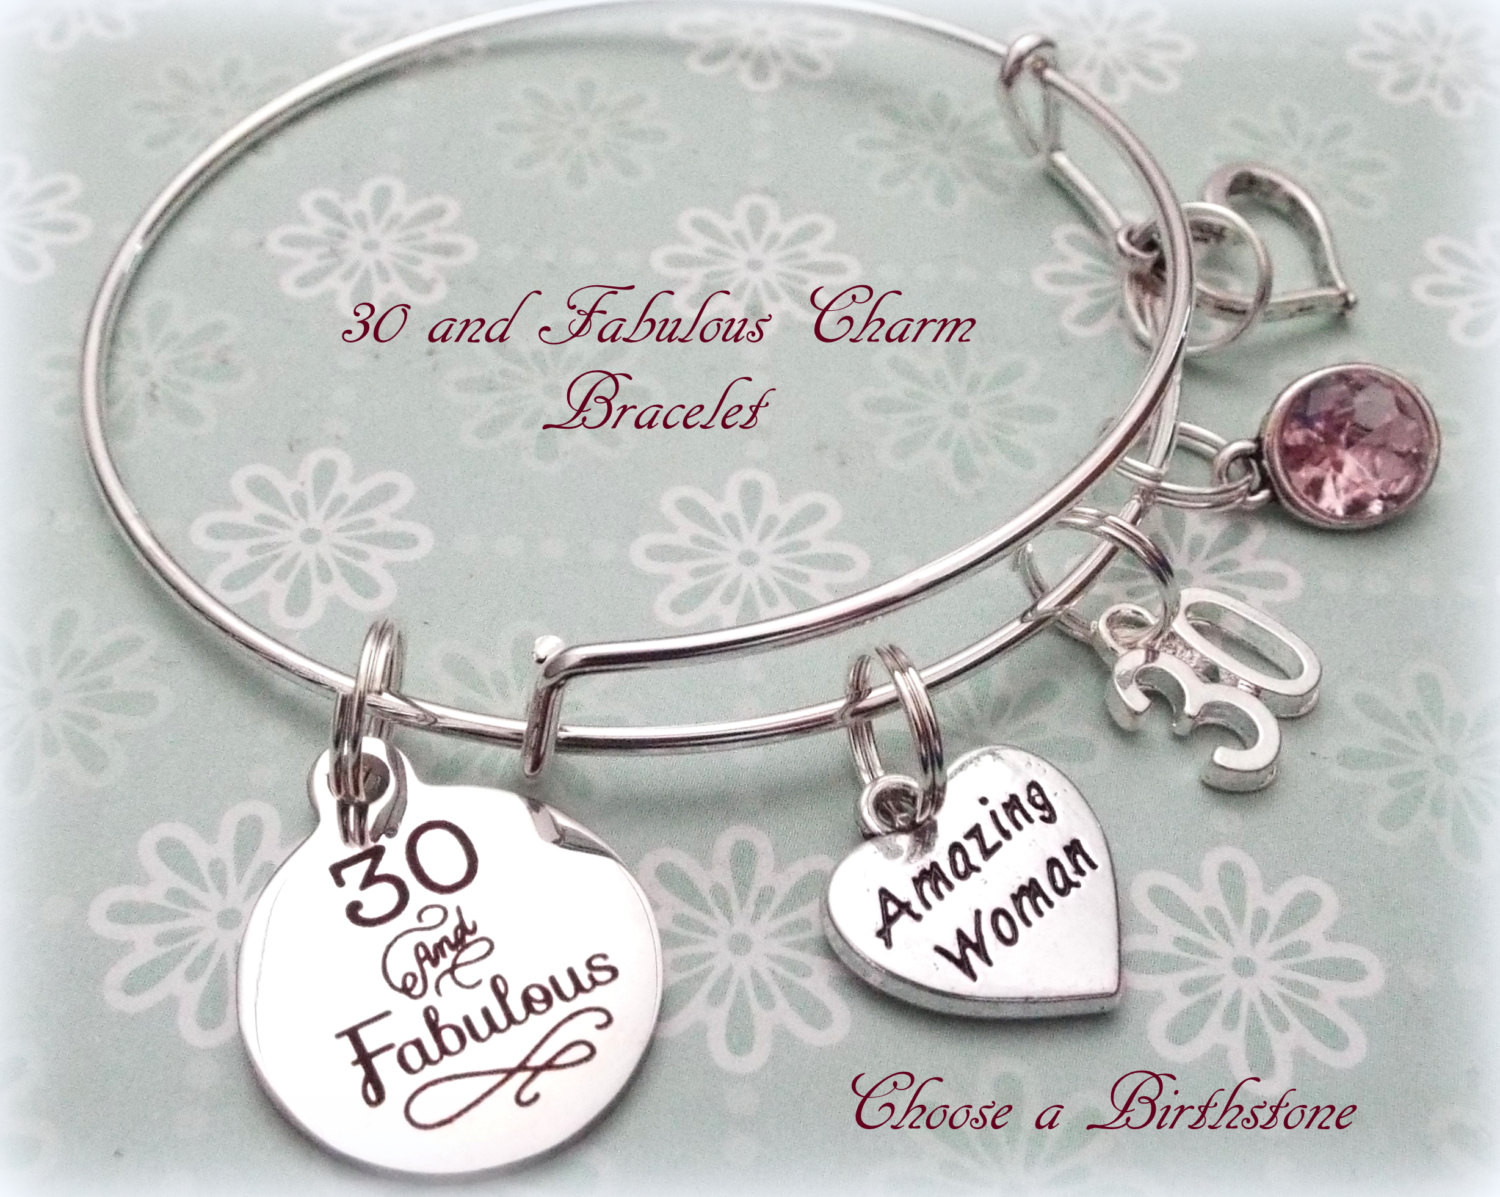 30Th Birthday Gift Ideas For Girlfriend
 30th Birthday Gift 30 and Fabulous Charm Bracelet